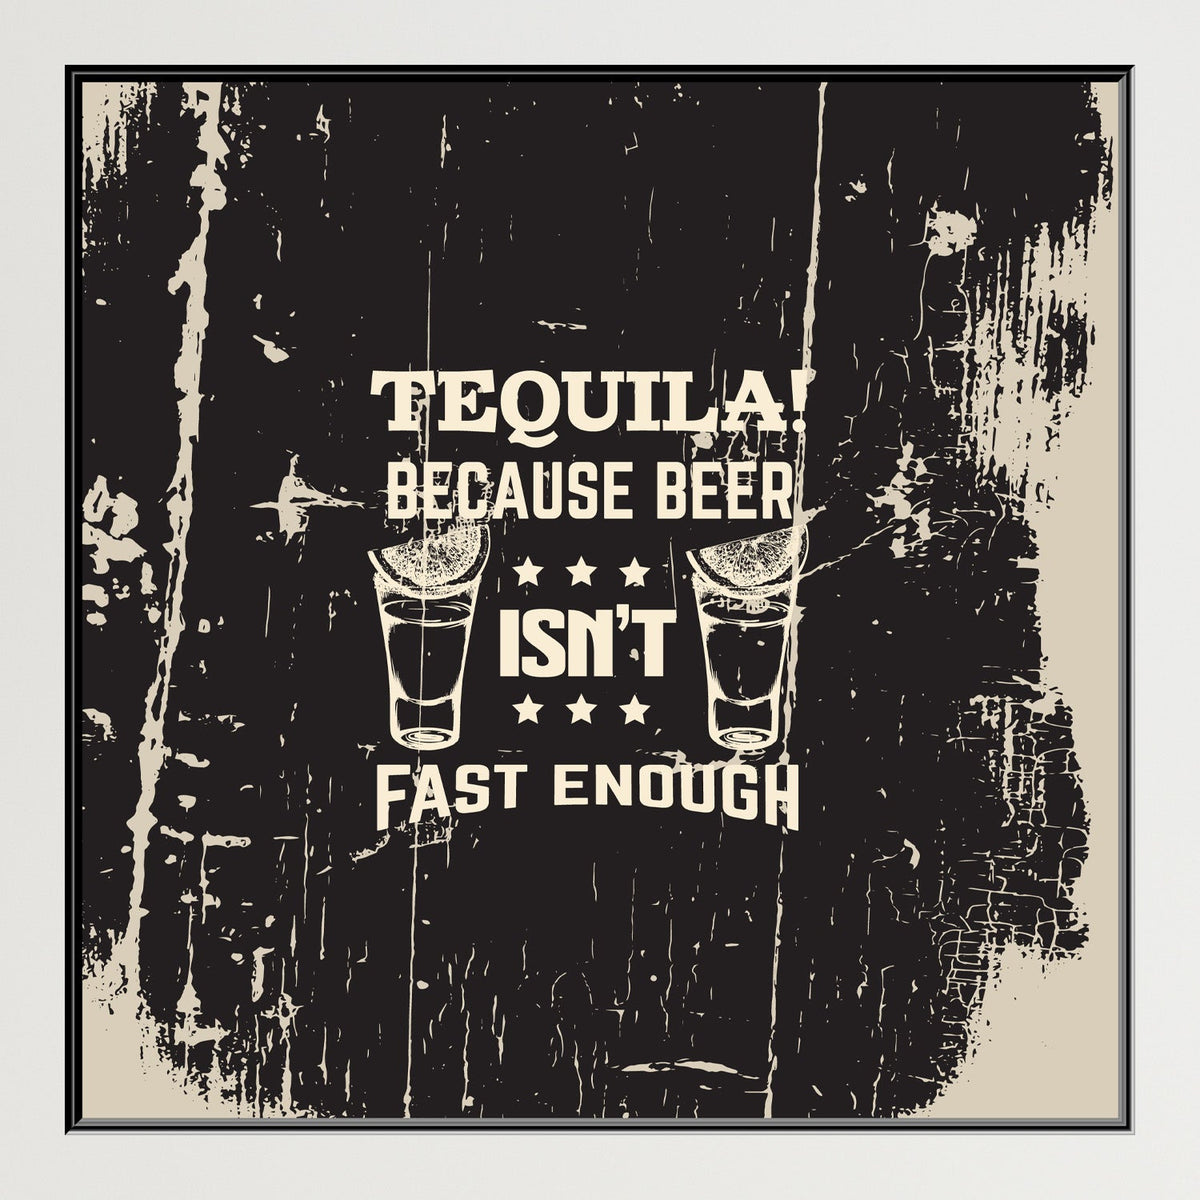 https://cdn.shopify.com/s/files/1/0387/9986/8044/products/TequilaBecauseCanvasArtprintFloatingFrame-Plain.jpg